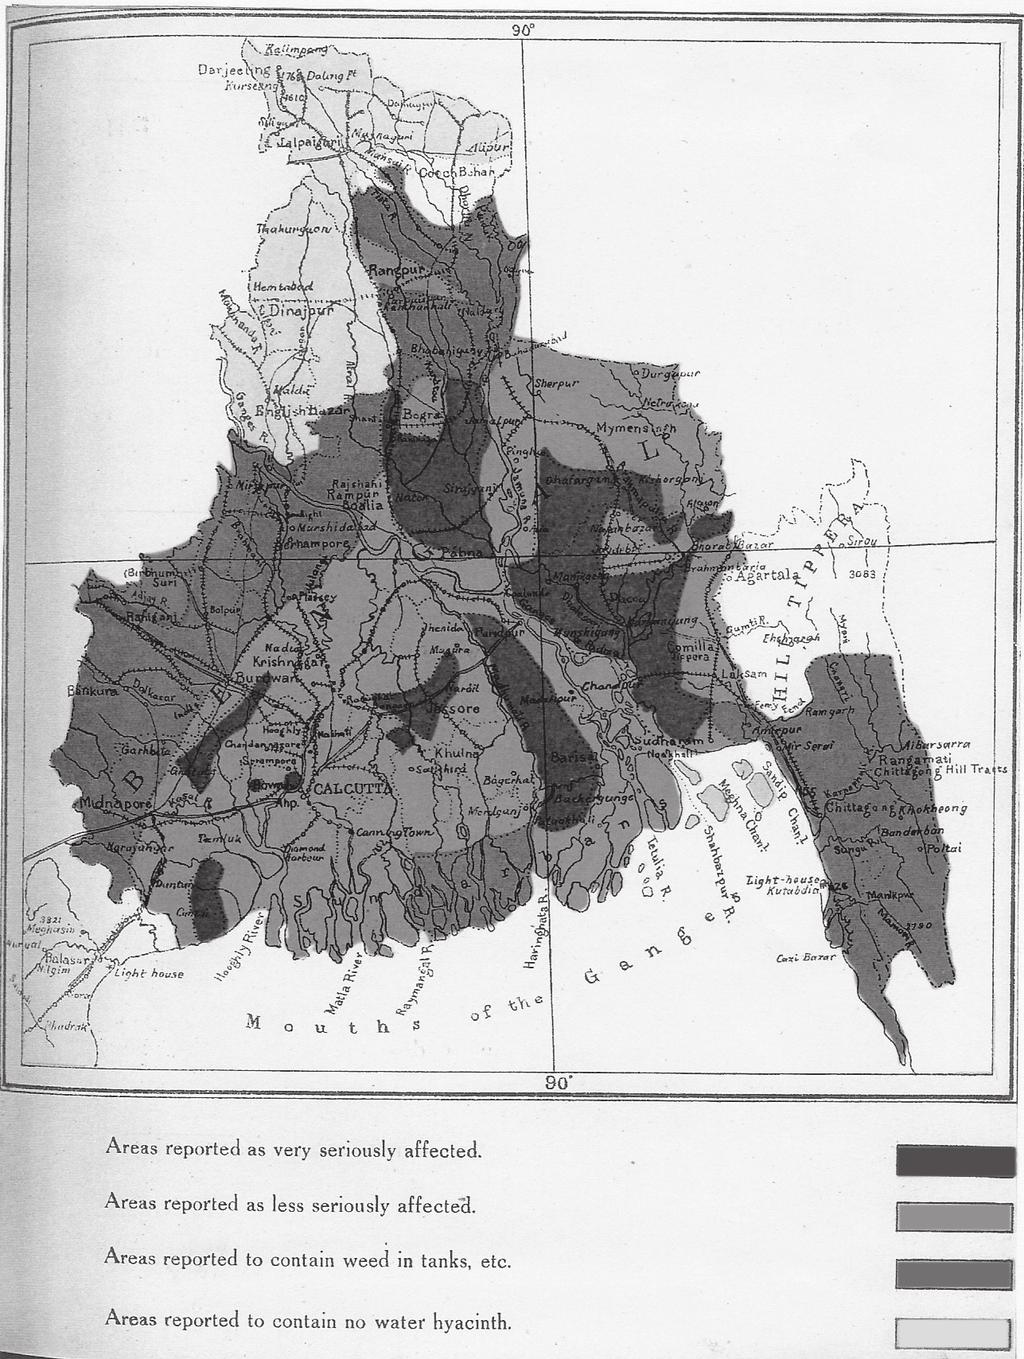 FIGHTING WITH A WEED 199 FIGURE 1. A map of Bengal showing areas affected by water hyacinth. Source: Kenneth McLean, Water Hyacinth.